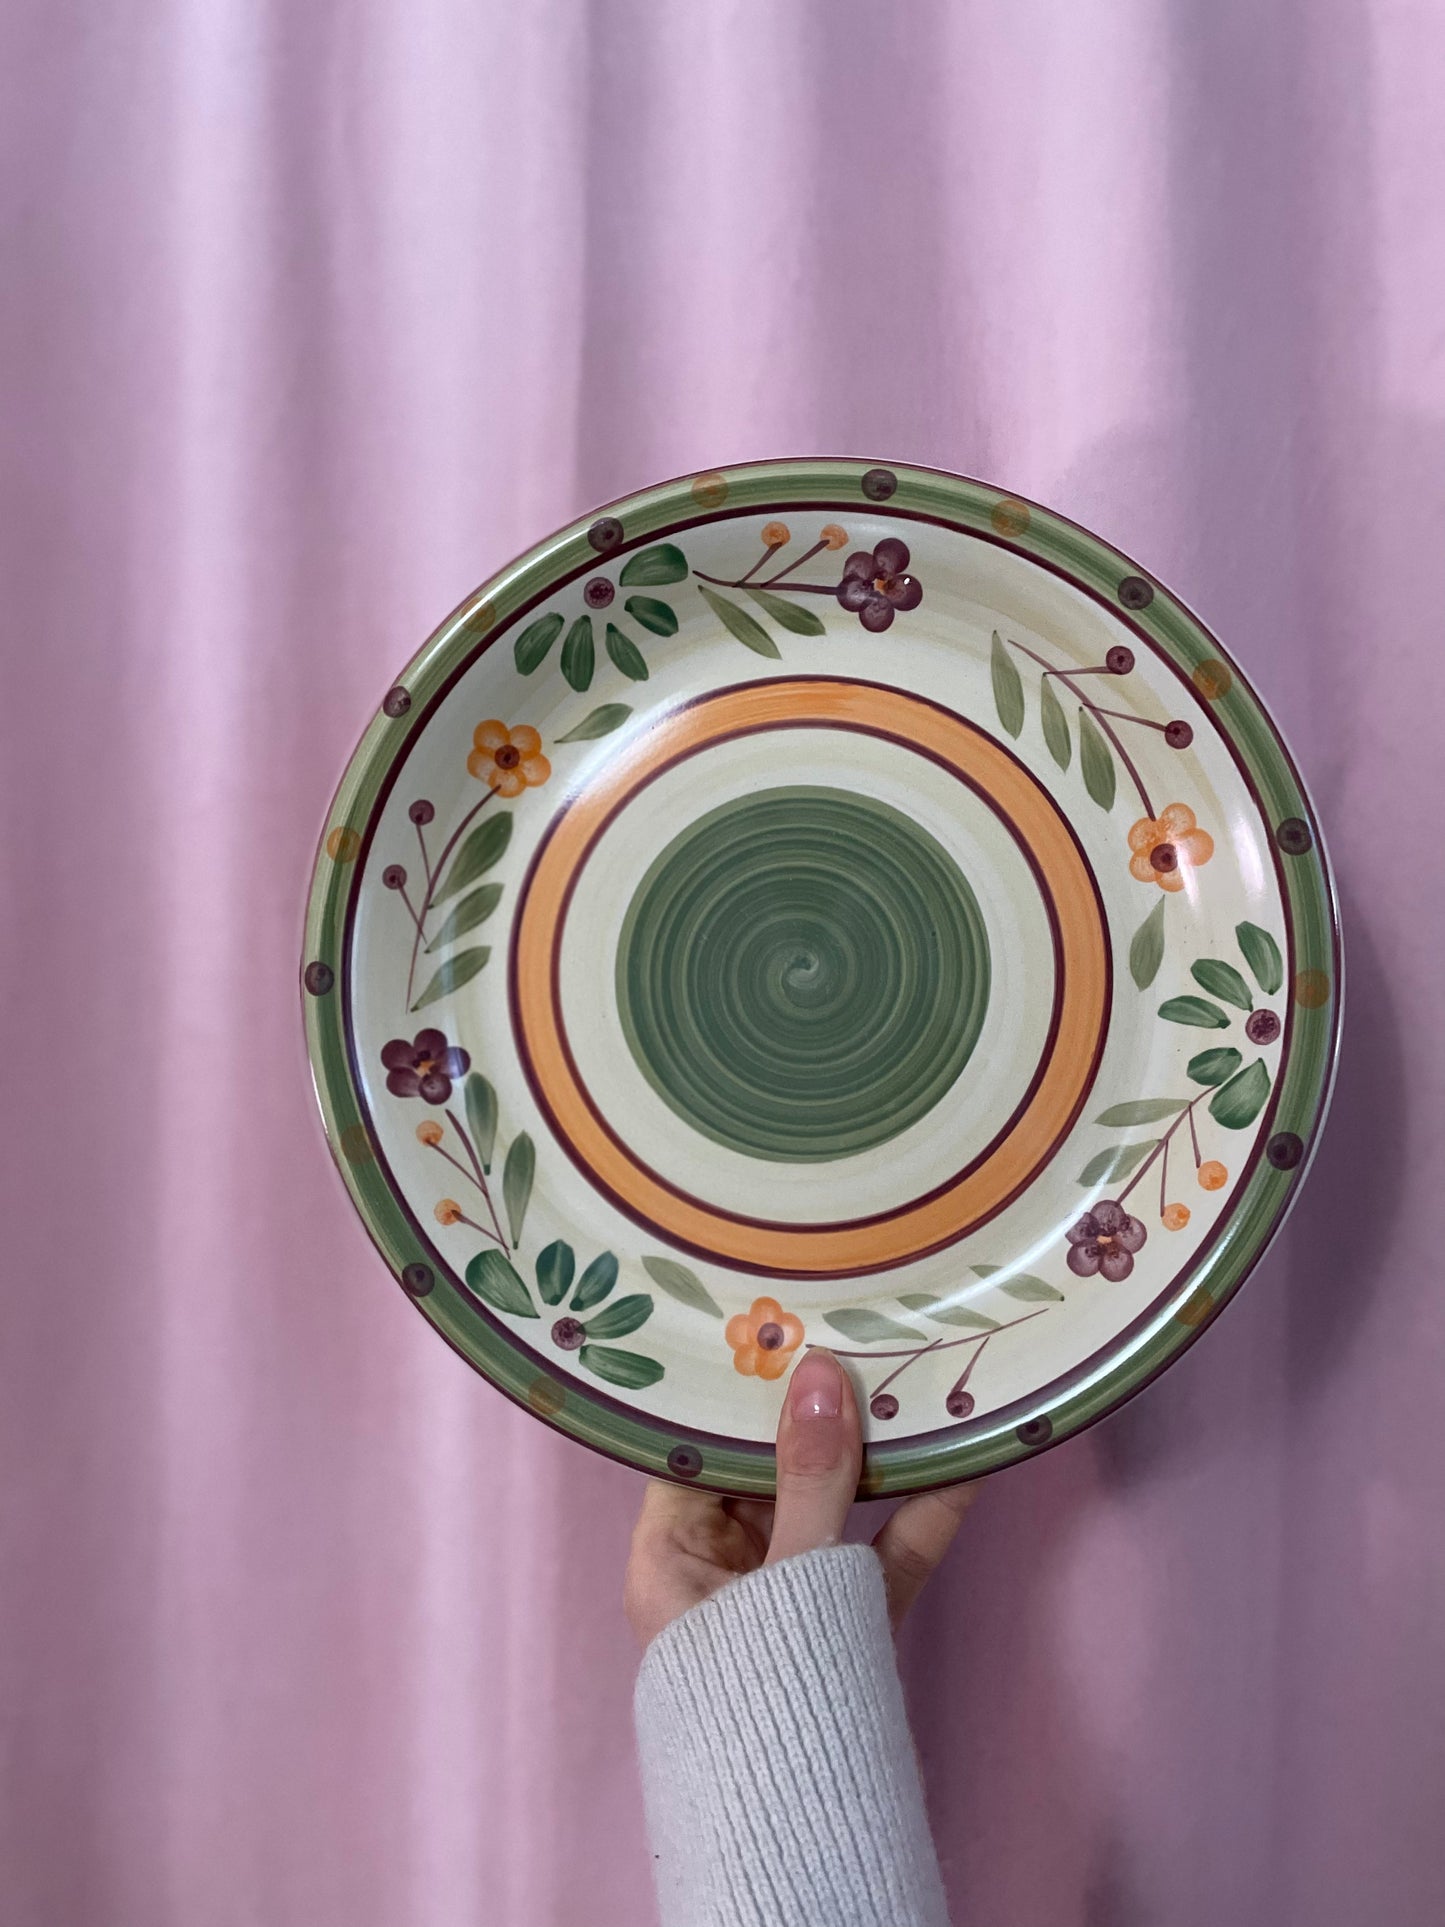 Flowered dinner plates in orange and green